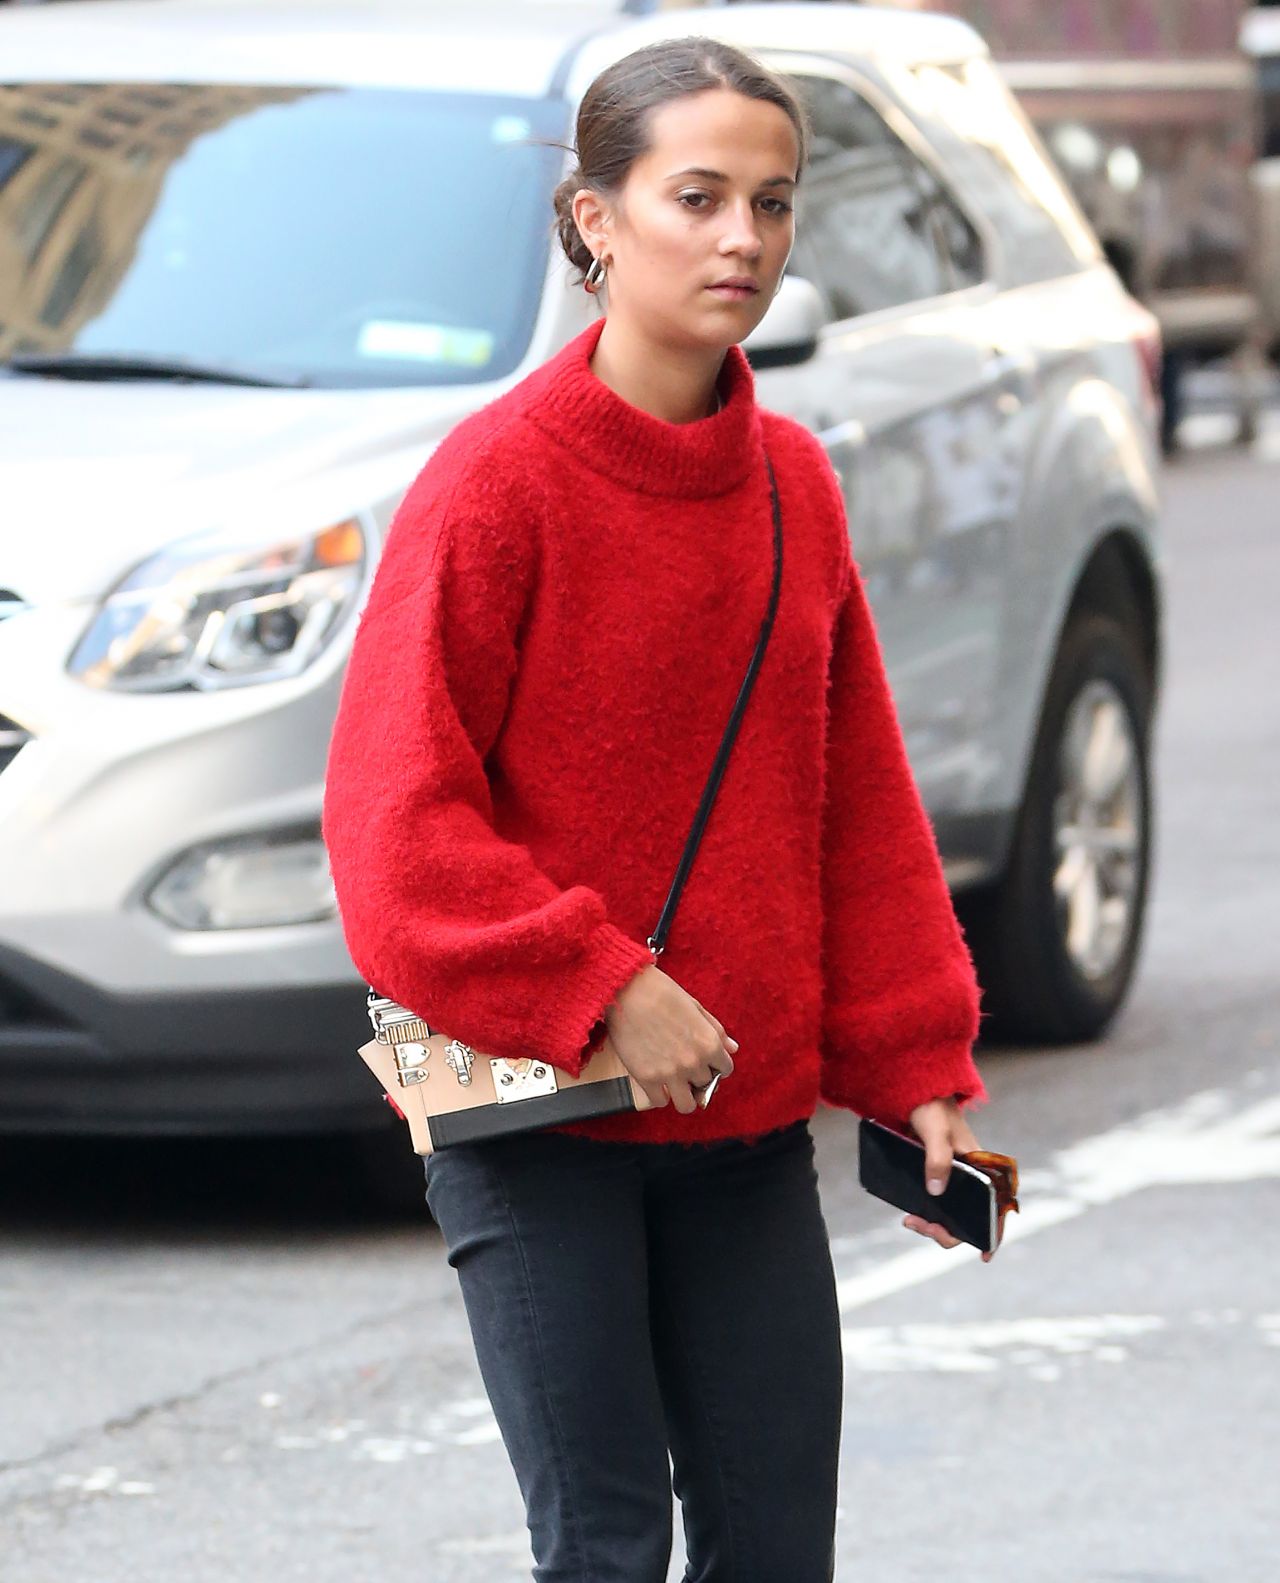 Alicia Vikander Keeps It Casual For Afternoon Outing in NYC: Photo 4289386, Alicia Vikander Photos